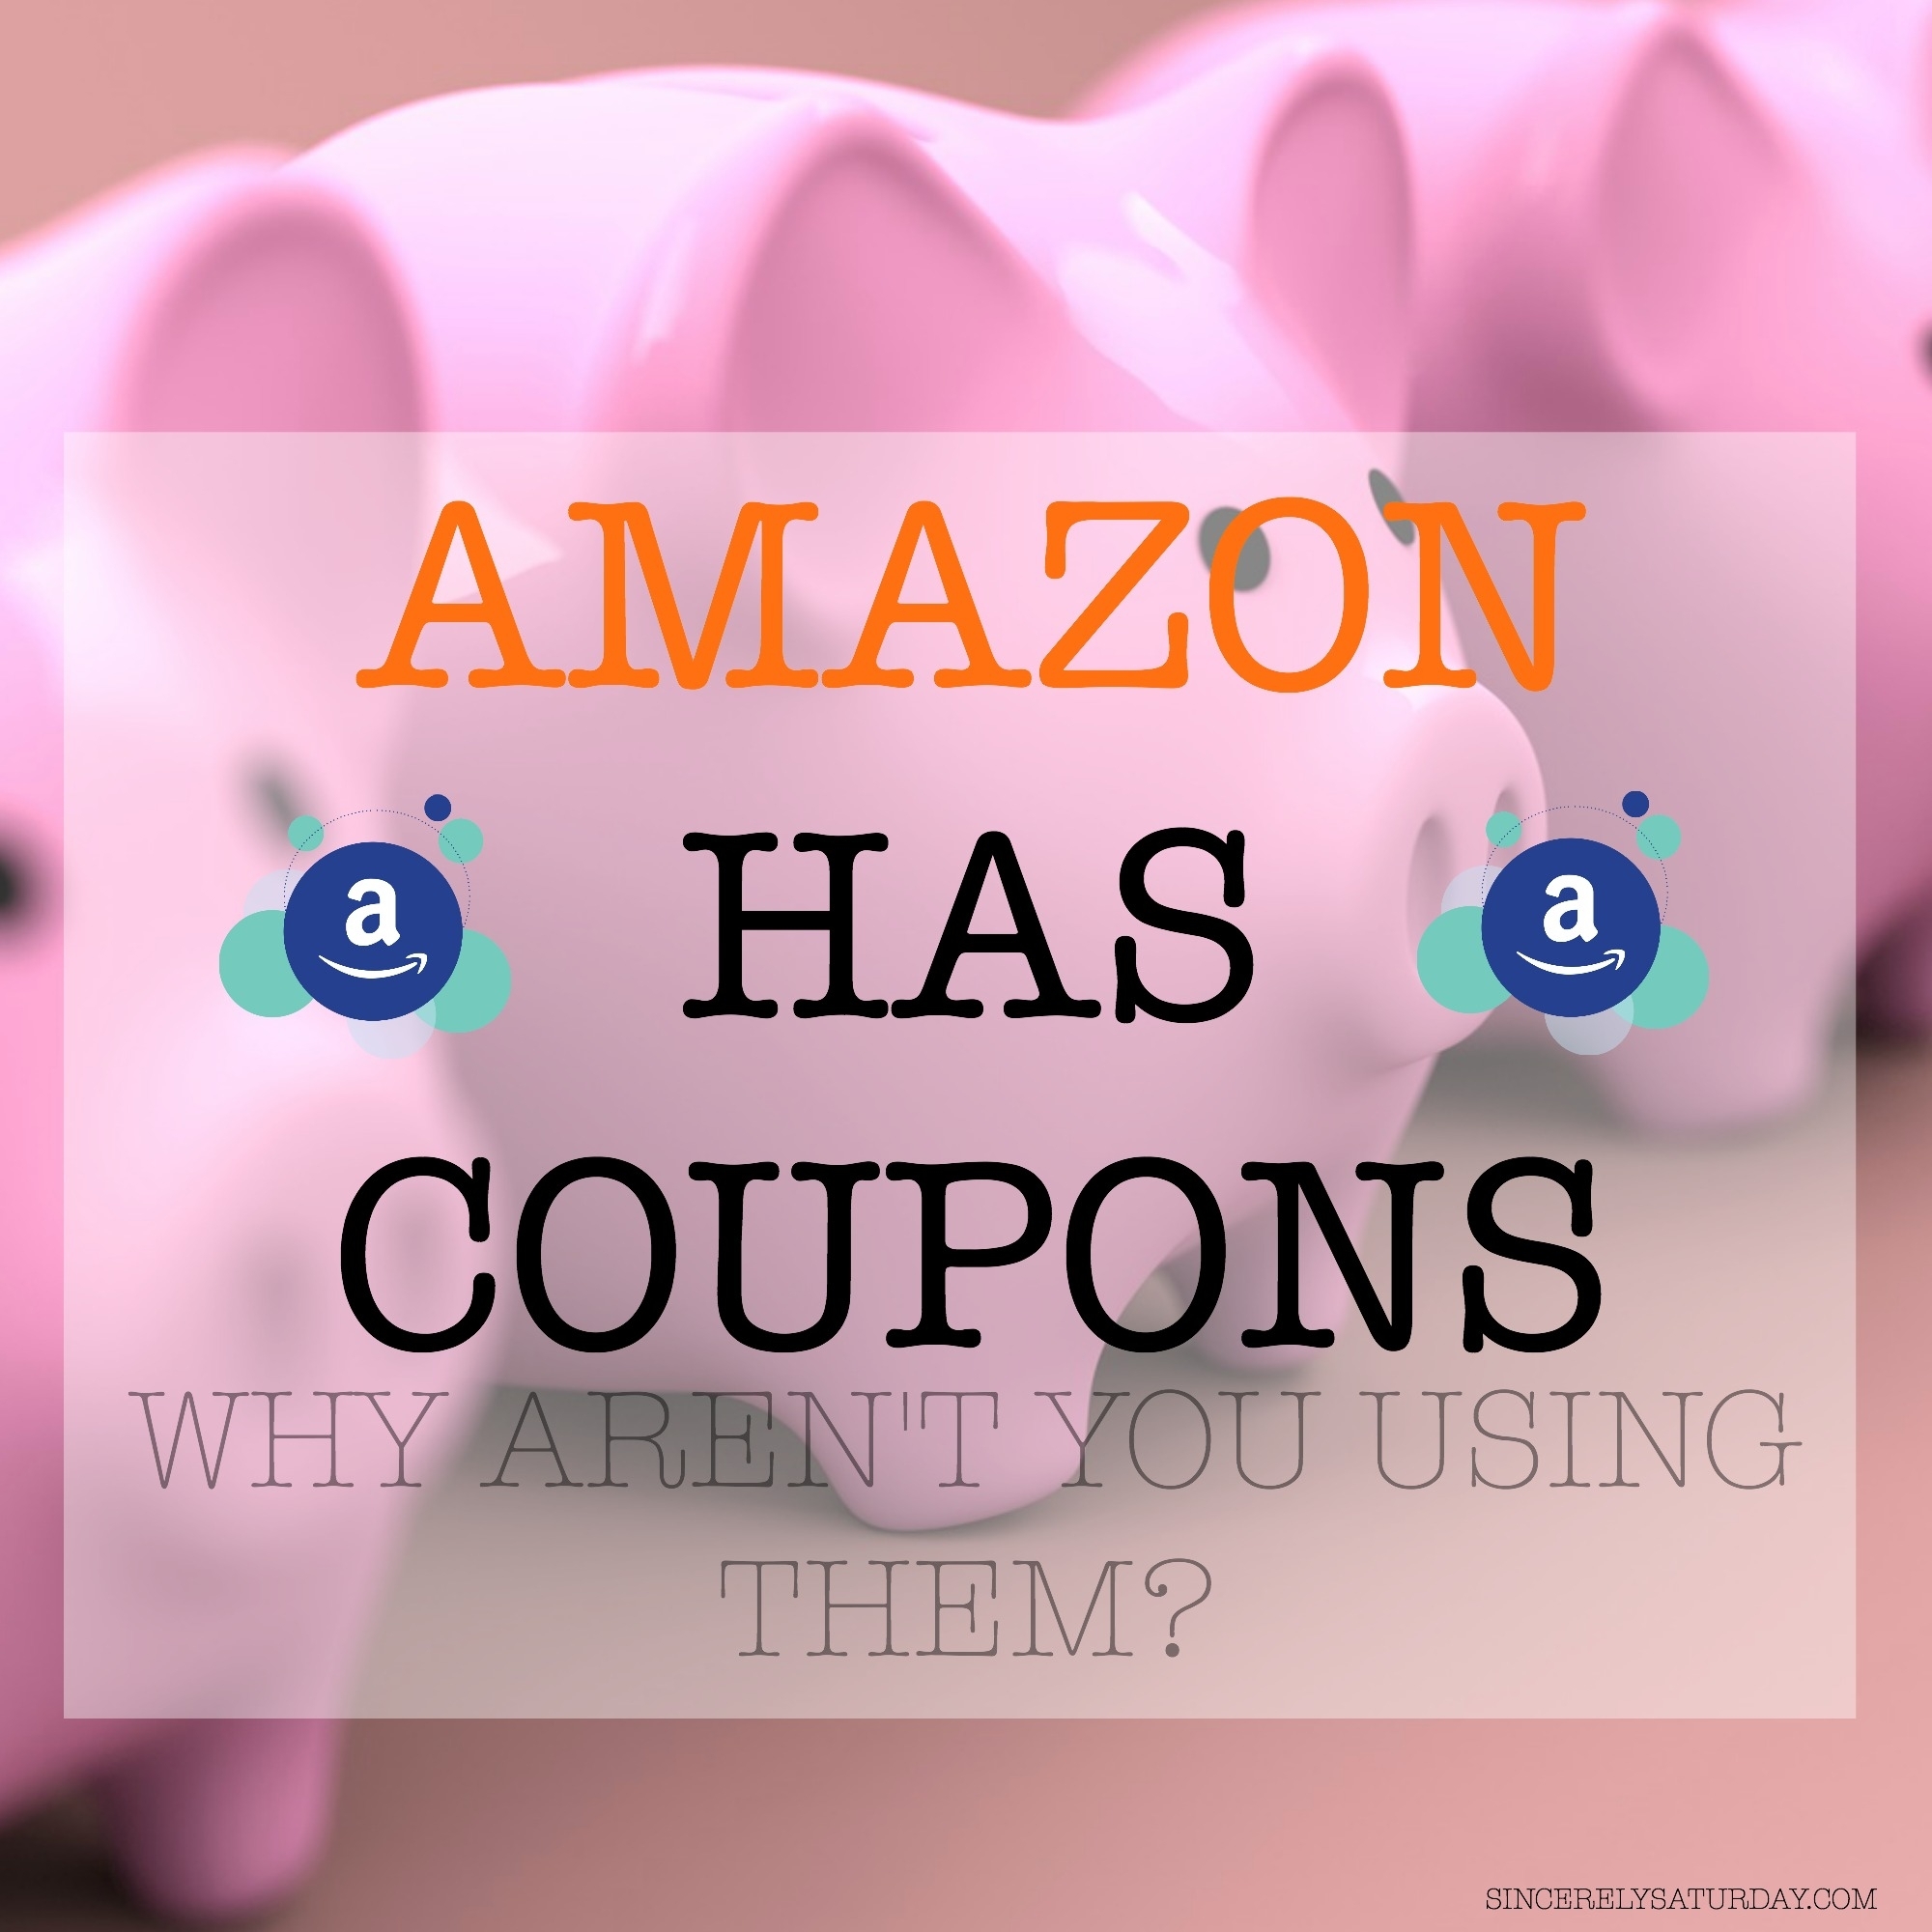 Amazon has coupons! Why aren't you using them?